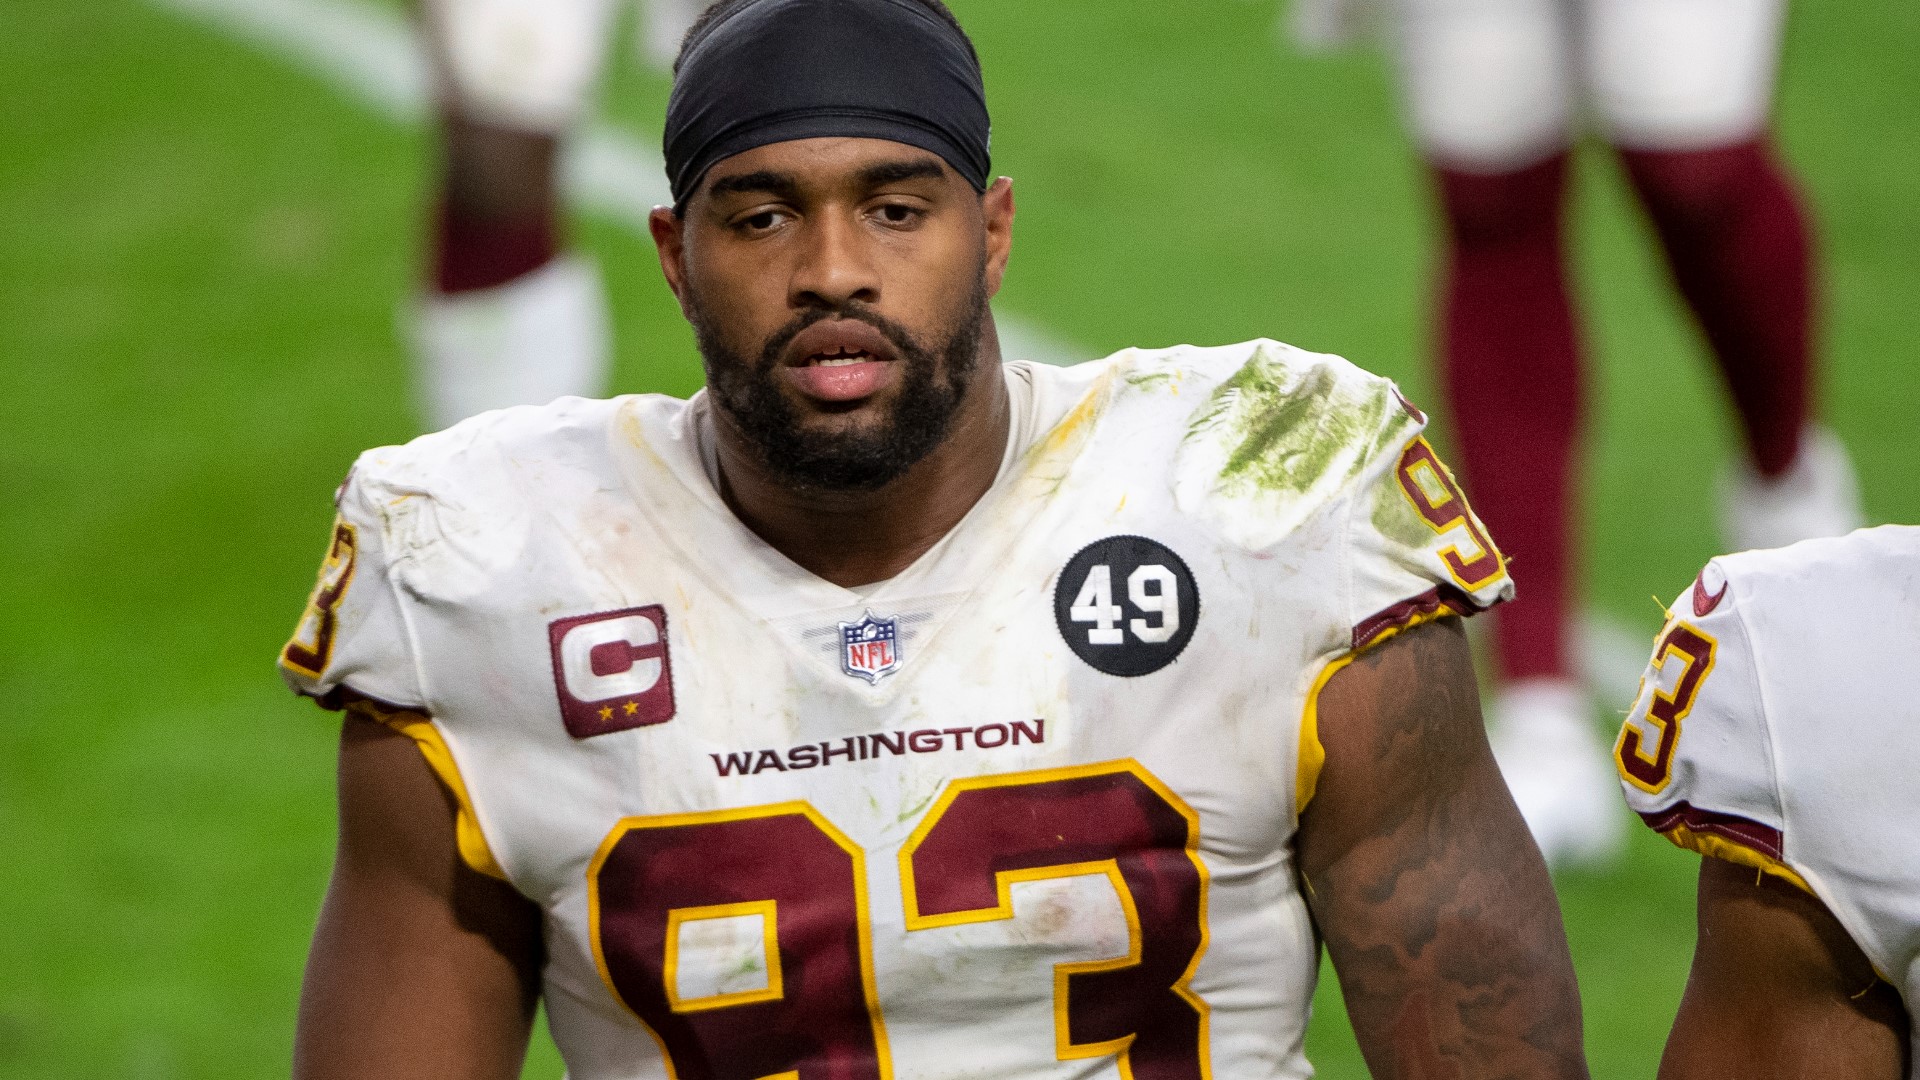 Defensive tackle Jon Allen sings an extension with the Washington Football Team ahead of training camp. Chris Russell of Locked On WFT shares insight on the deal.